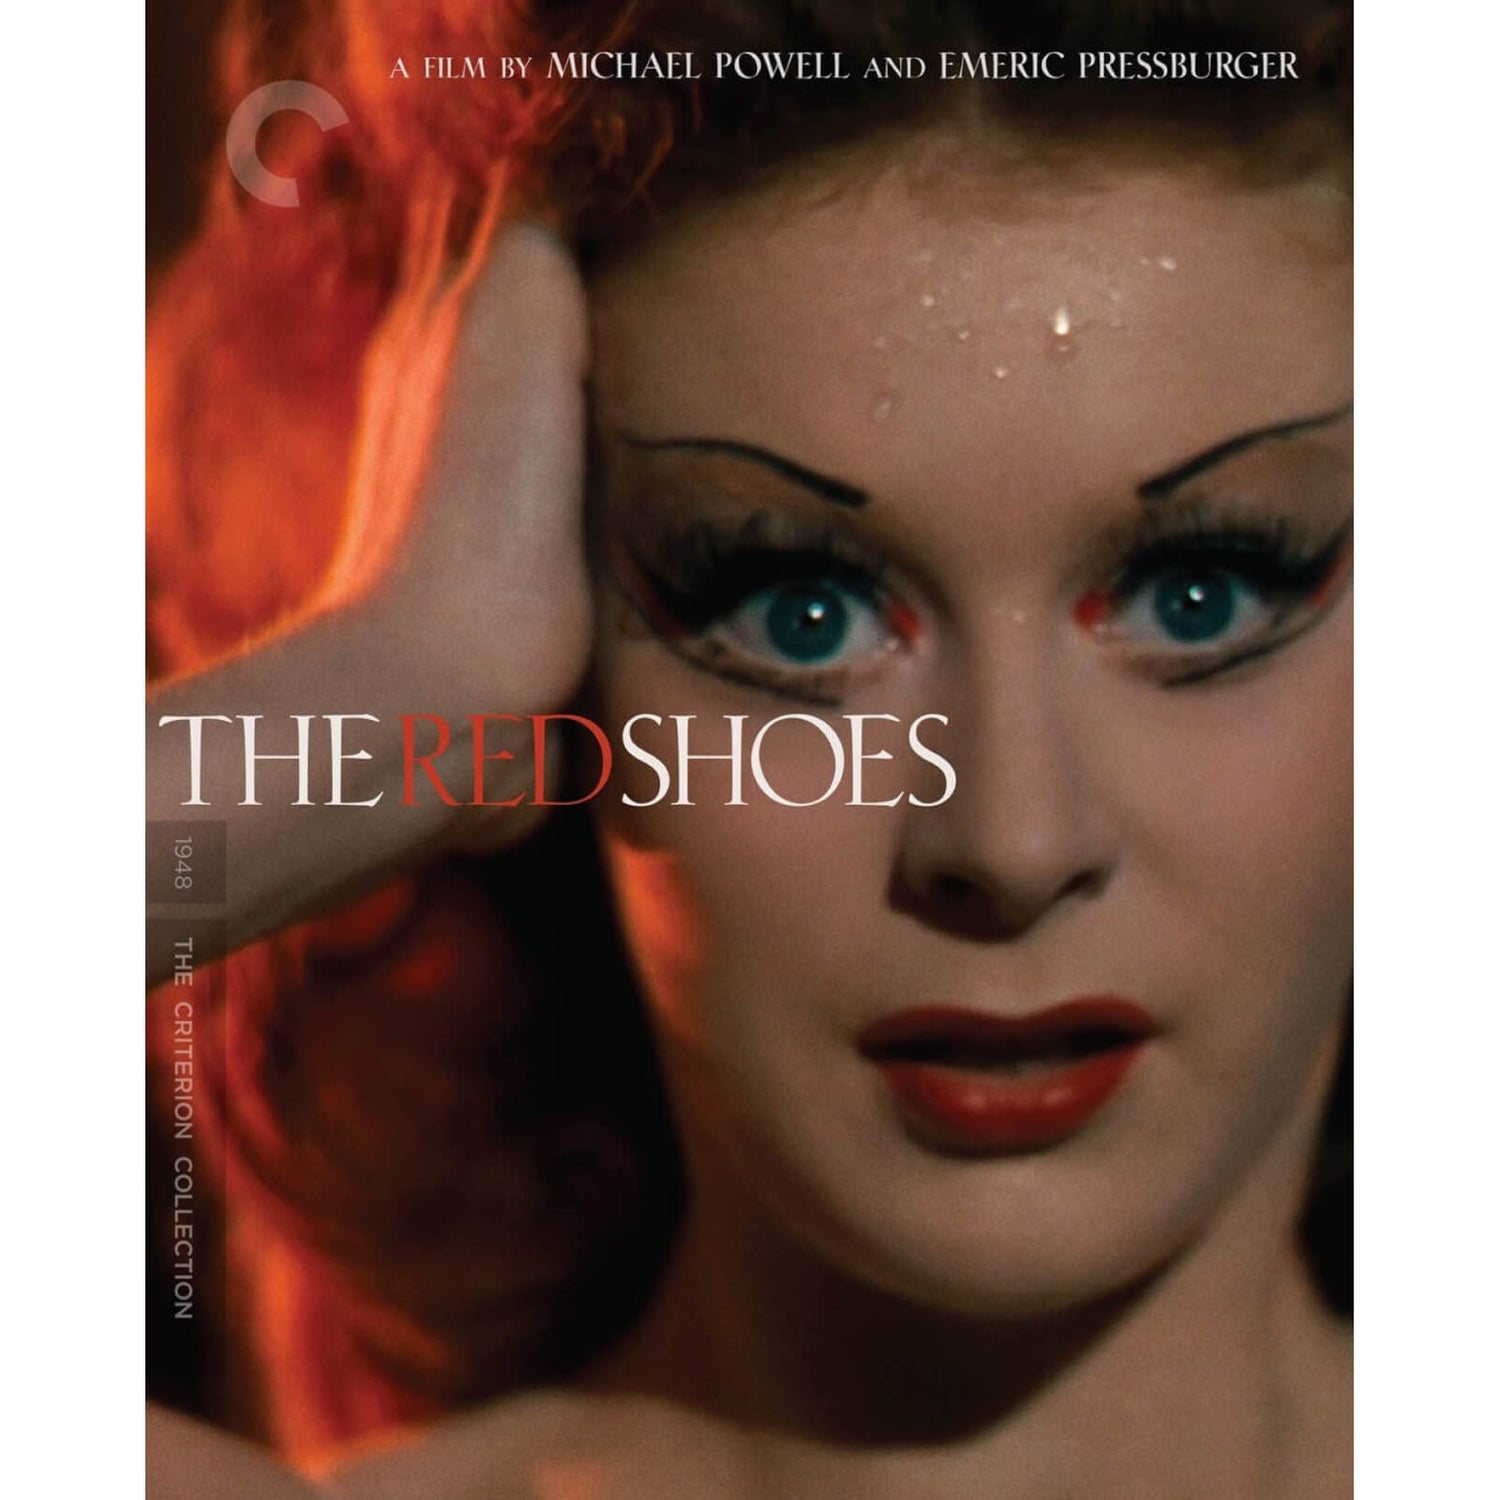 The Red Shoes - The Criterion Collection (US Import)